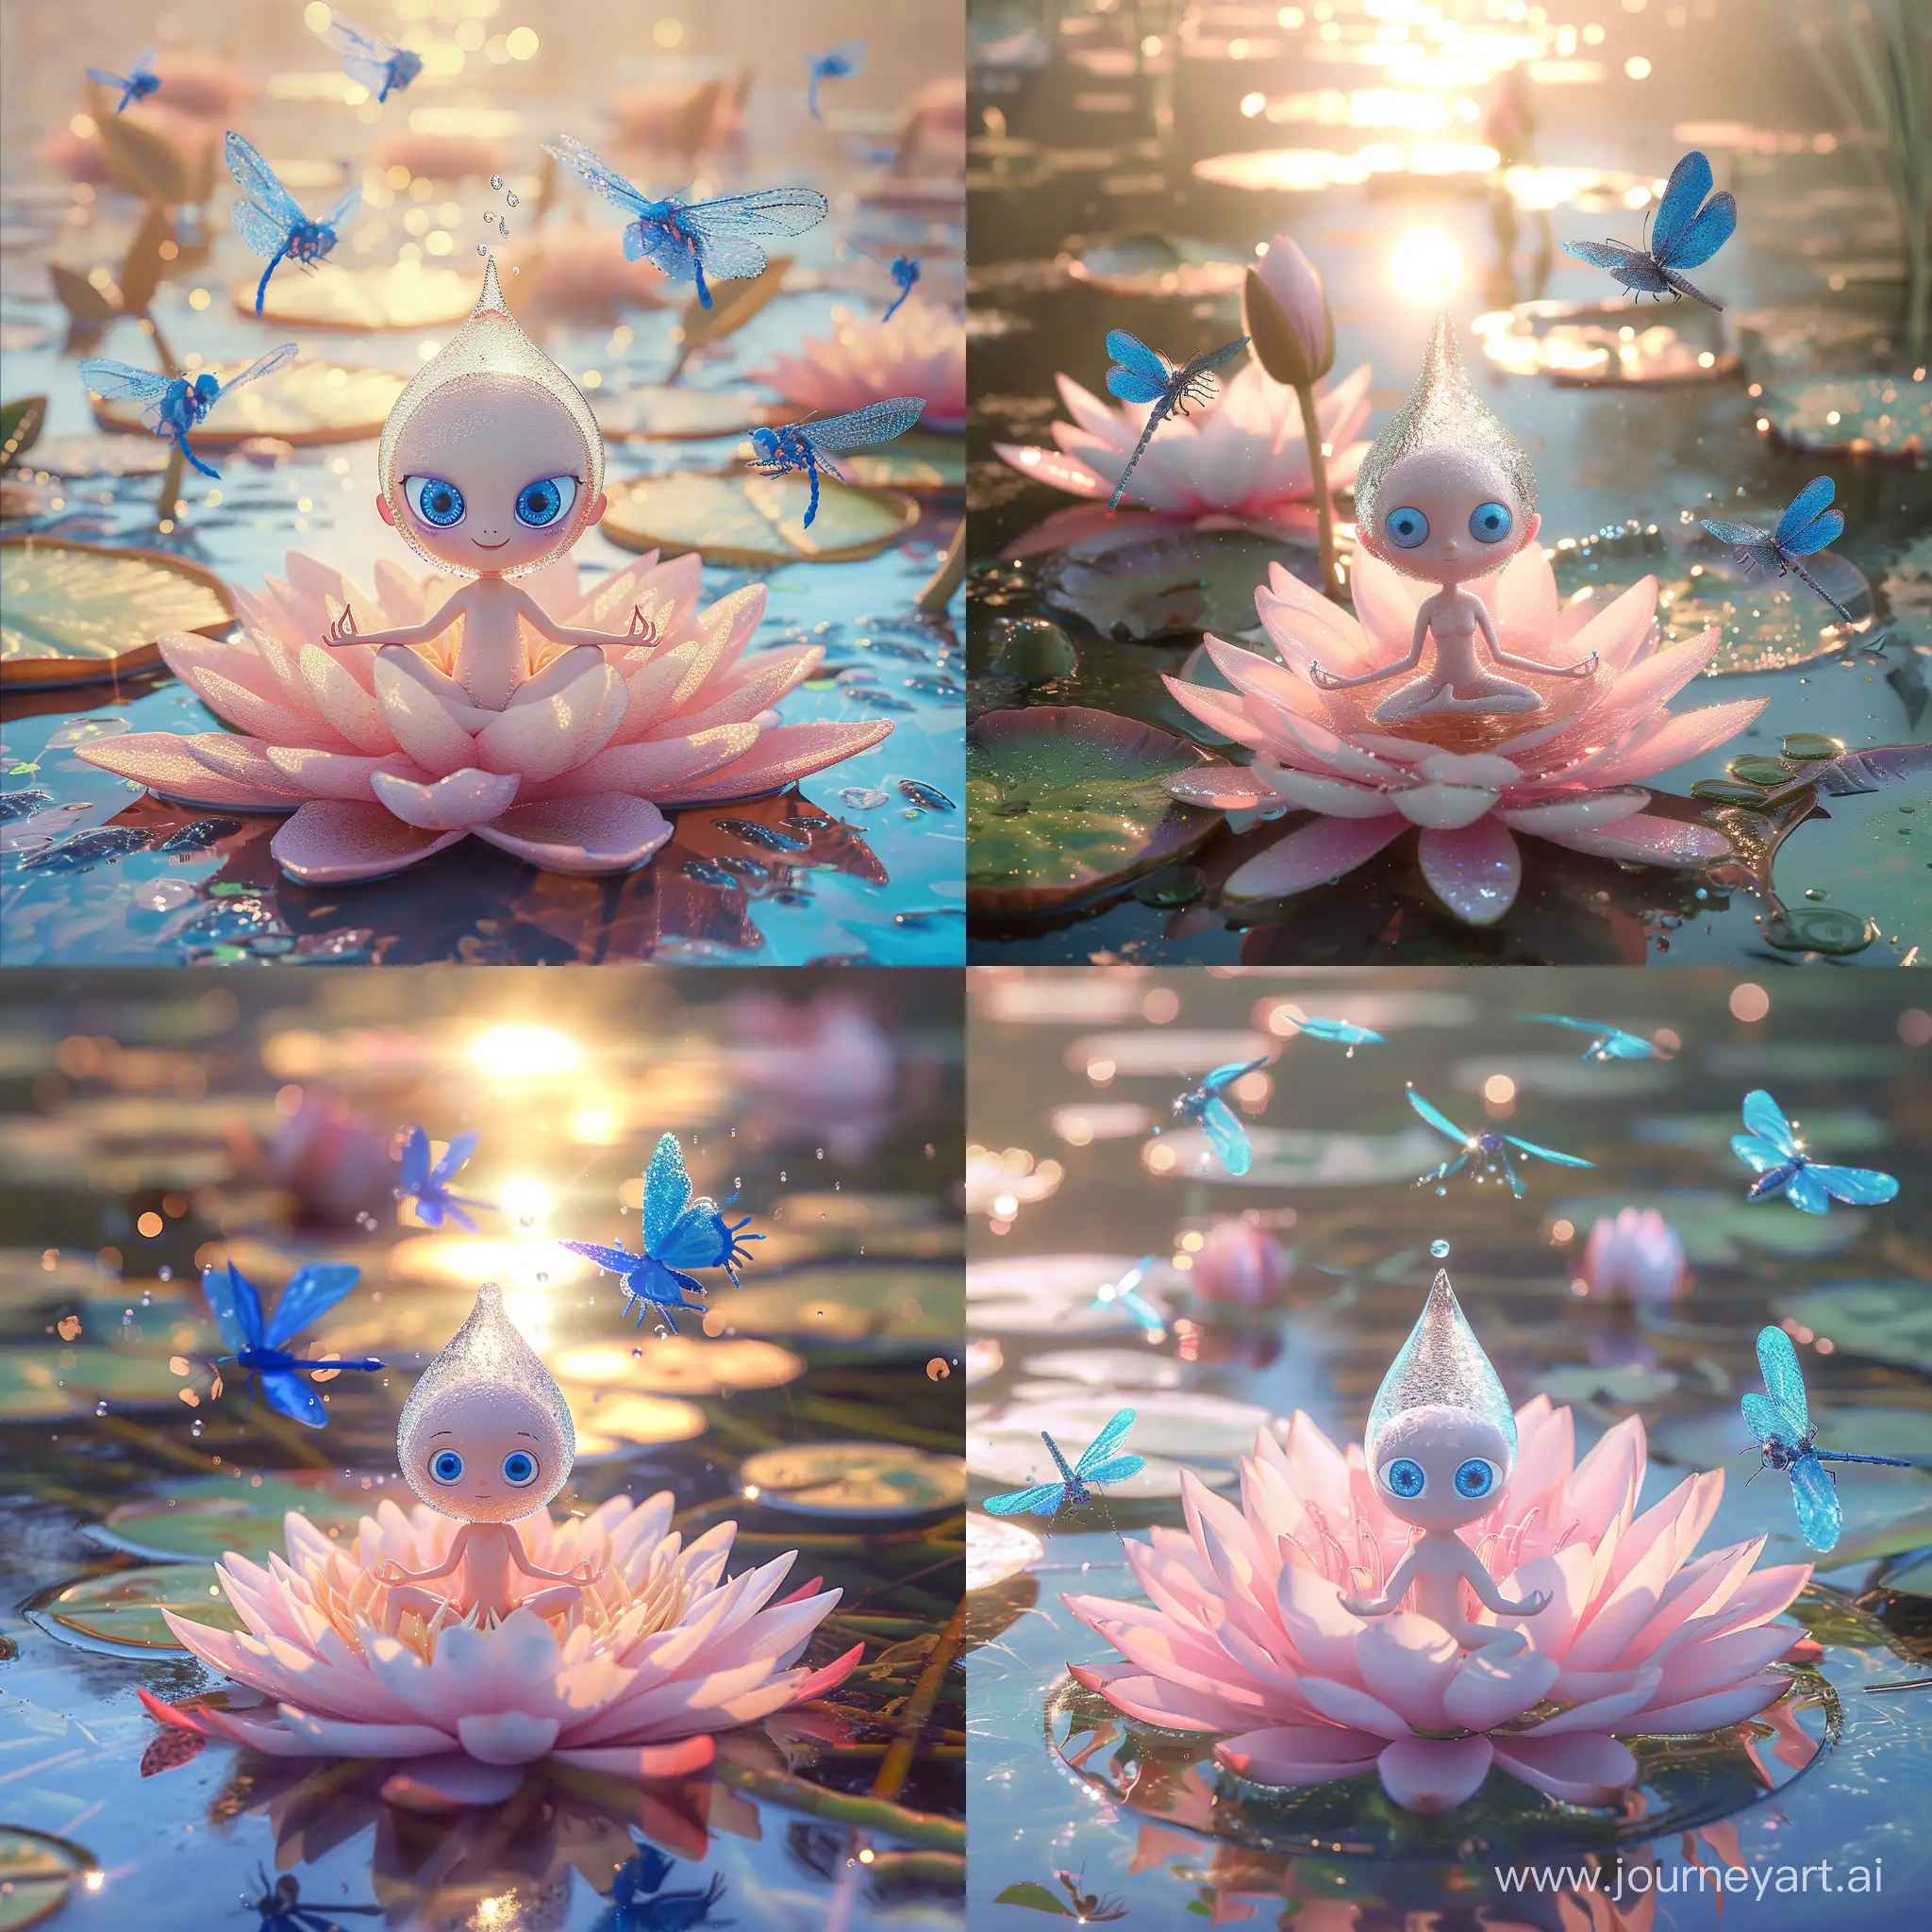 A cute humanoid water drop with blue eyes, transparent and shiny, is in yoga position on a pink water lily flower, the drop is well textured and fine. she is alone. The water lily is on a pond with lots of water lilies. Around the drop fly realistic blue dragonflies and realistic blue butterflies with blue wings. ultra detailed insects. bright light. textured image. photo style, HDR, UHD